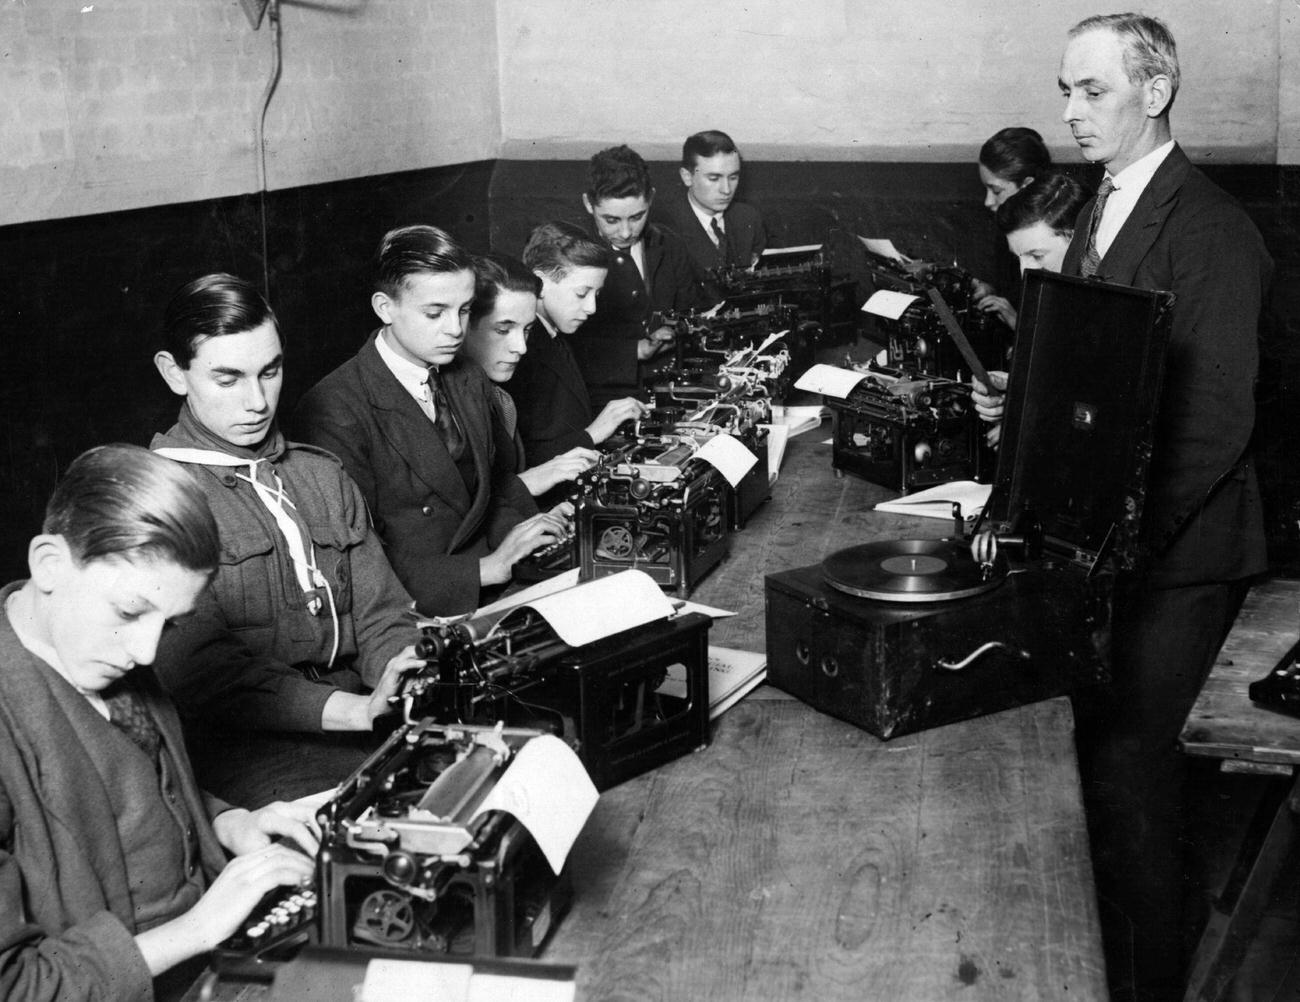 Boys from London Homepaper Offices in typewriting class, circa 1930.